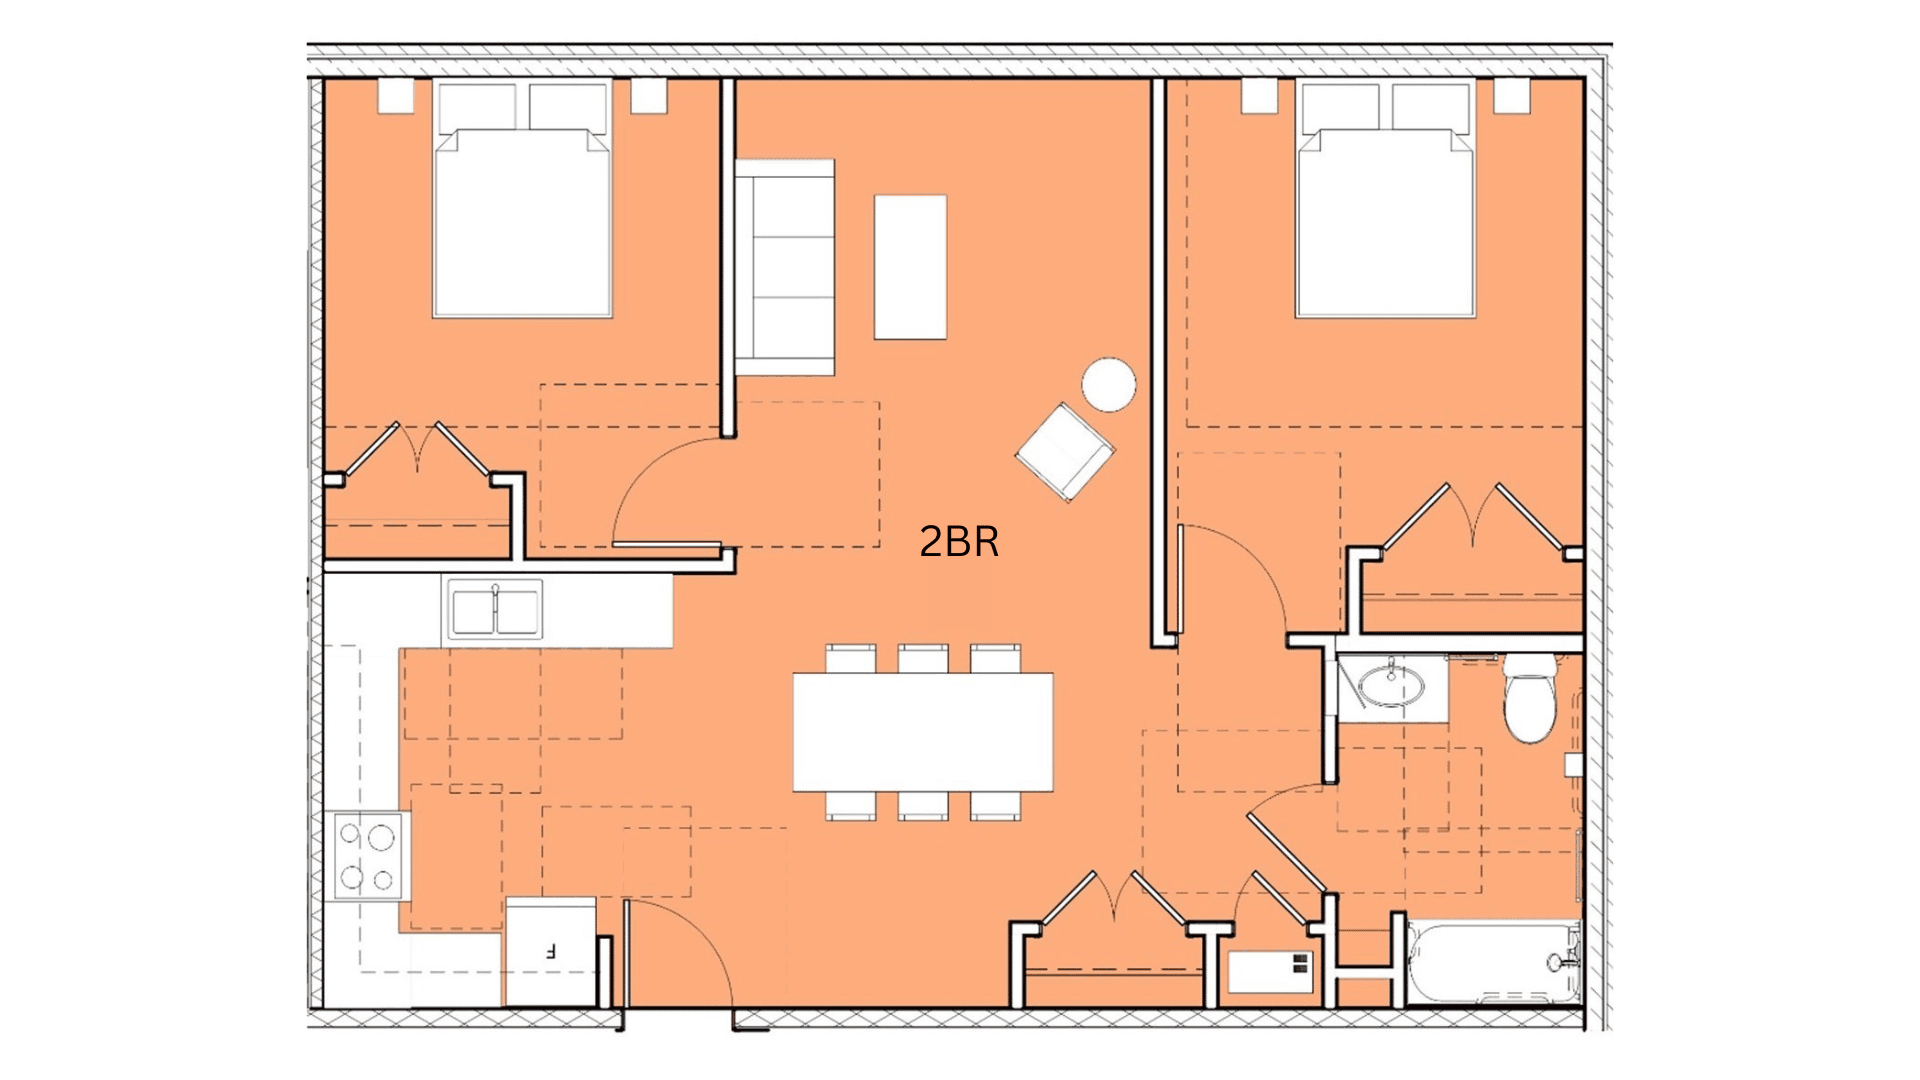 Layout of a two bedroom apartment.